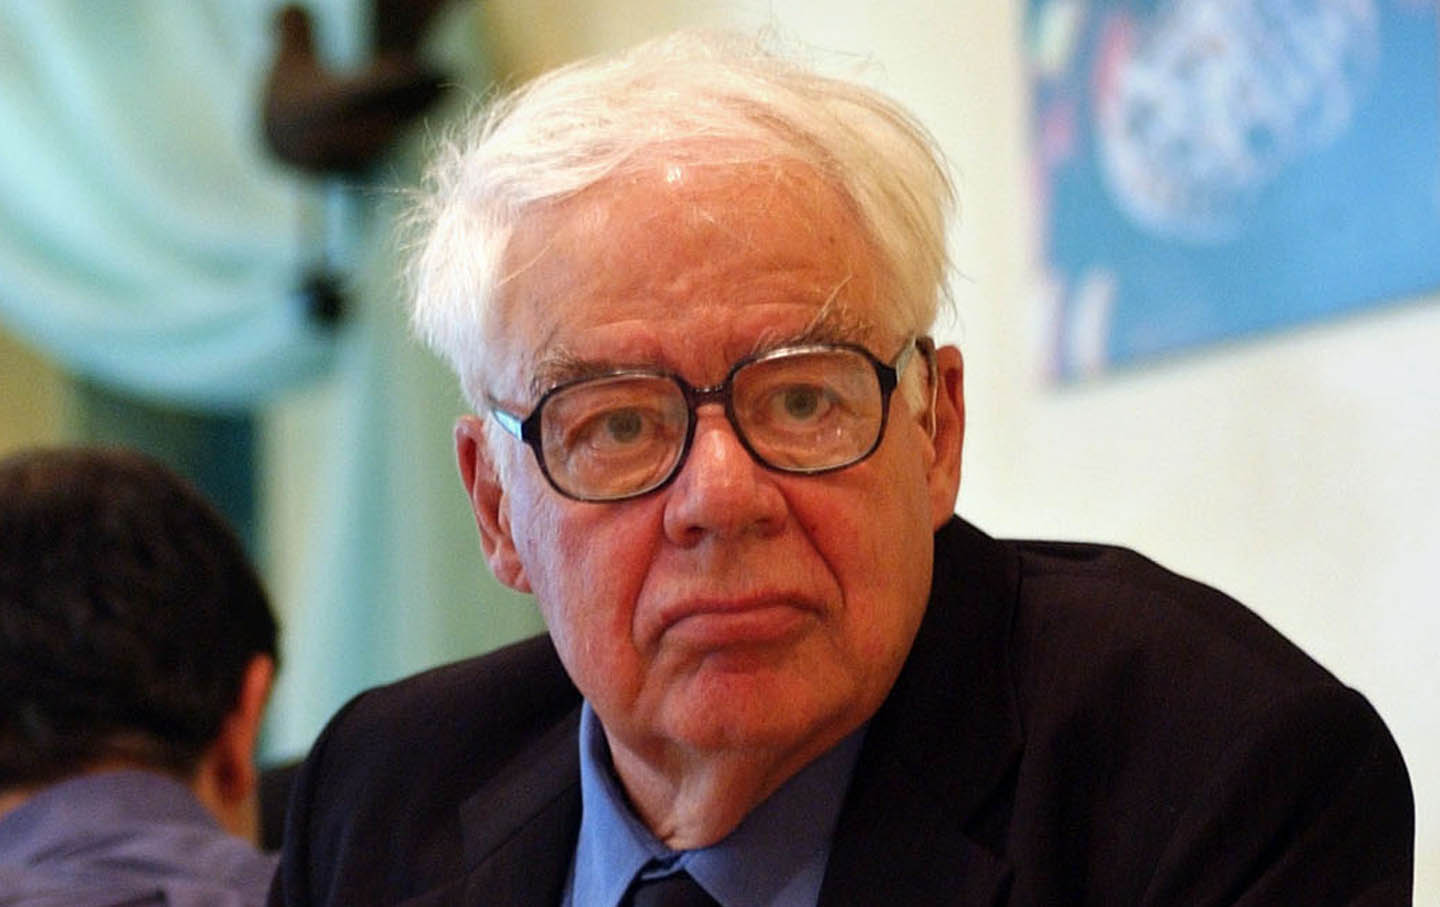 Richard Rorty waiting to speak, wearing glasses and a suit.